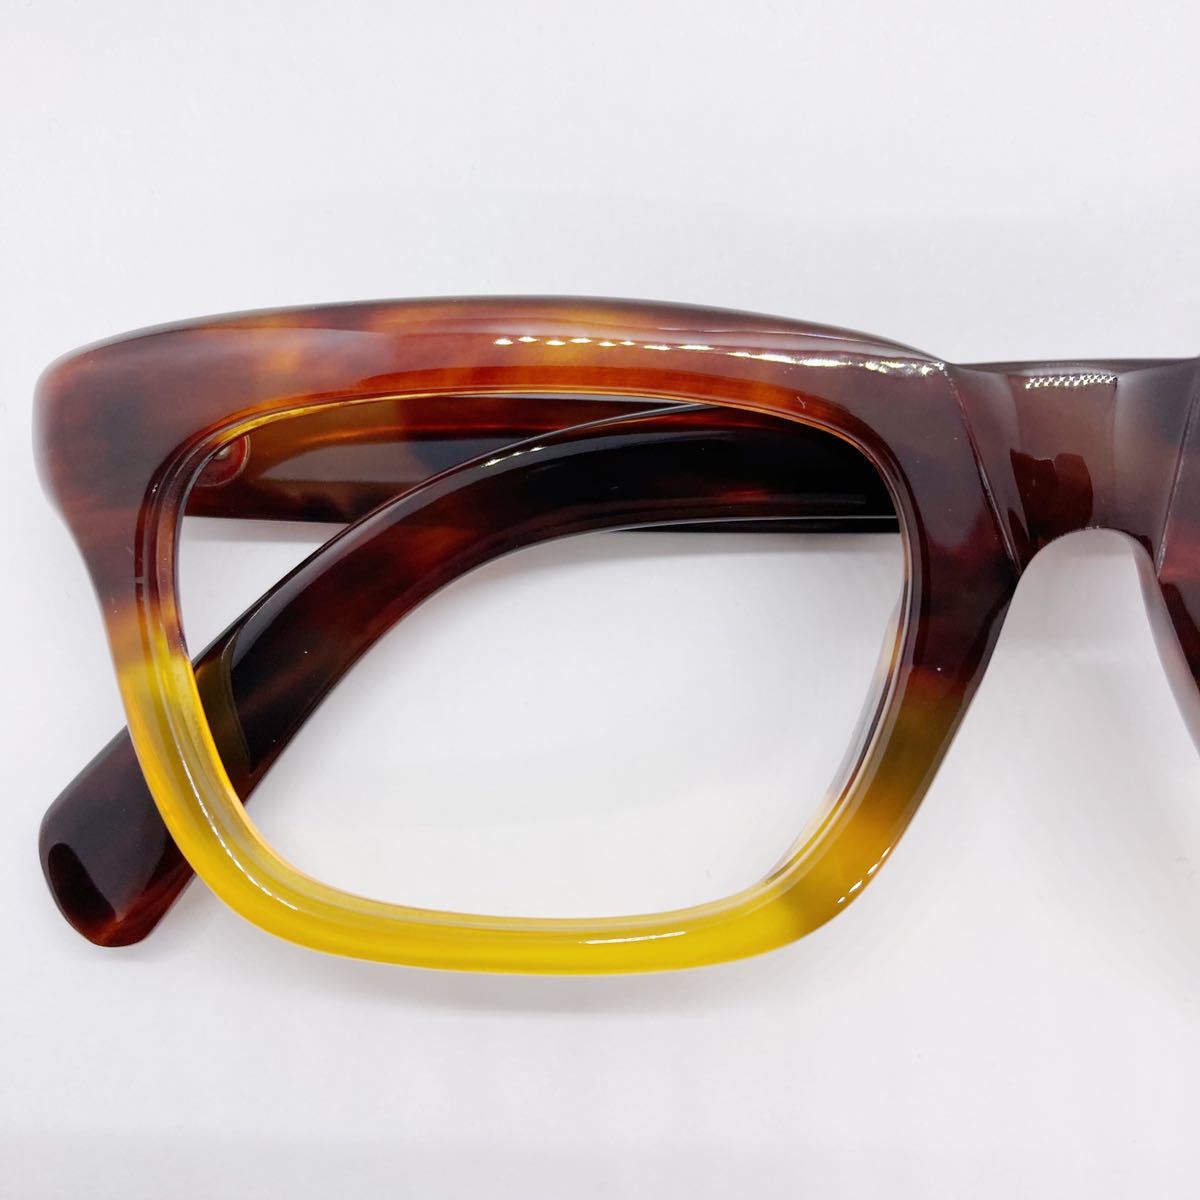 book@ tortoise shell 80 period glasses we Lynn ton dead stock Vintage made in Japan domestic production Crown punt Vintage glasses frame France 